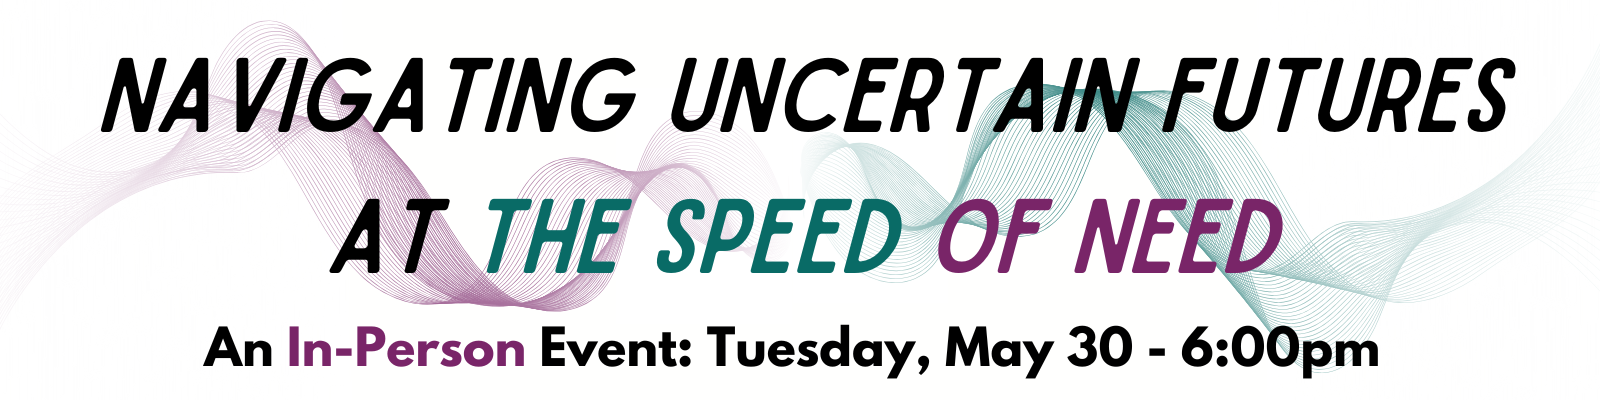 Navigating Uncertain Futures at the Speed of Need - An in-person panel: Tuesday, May 30 - 6:00pm